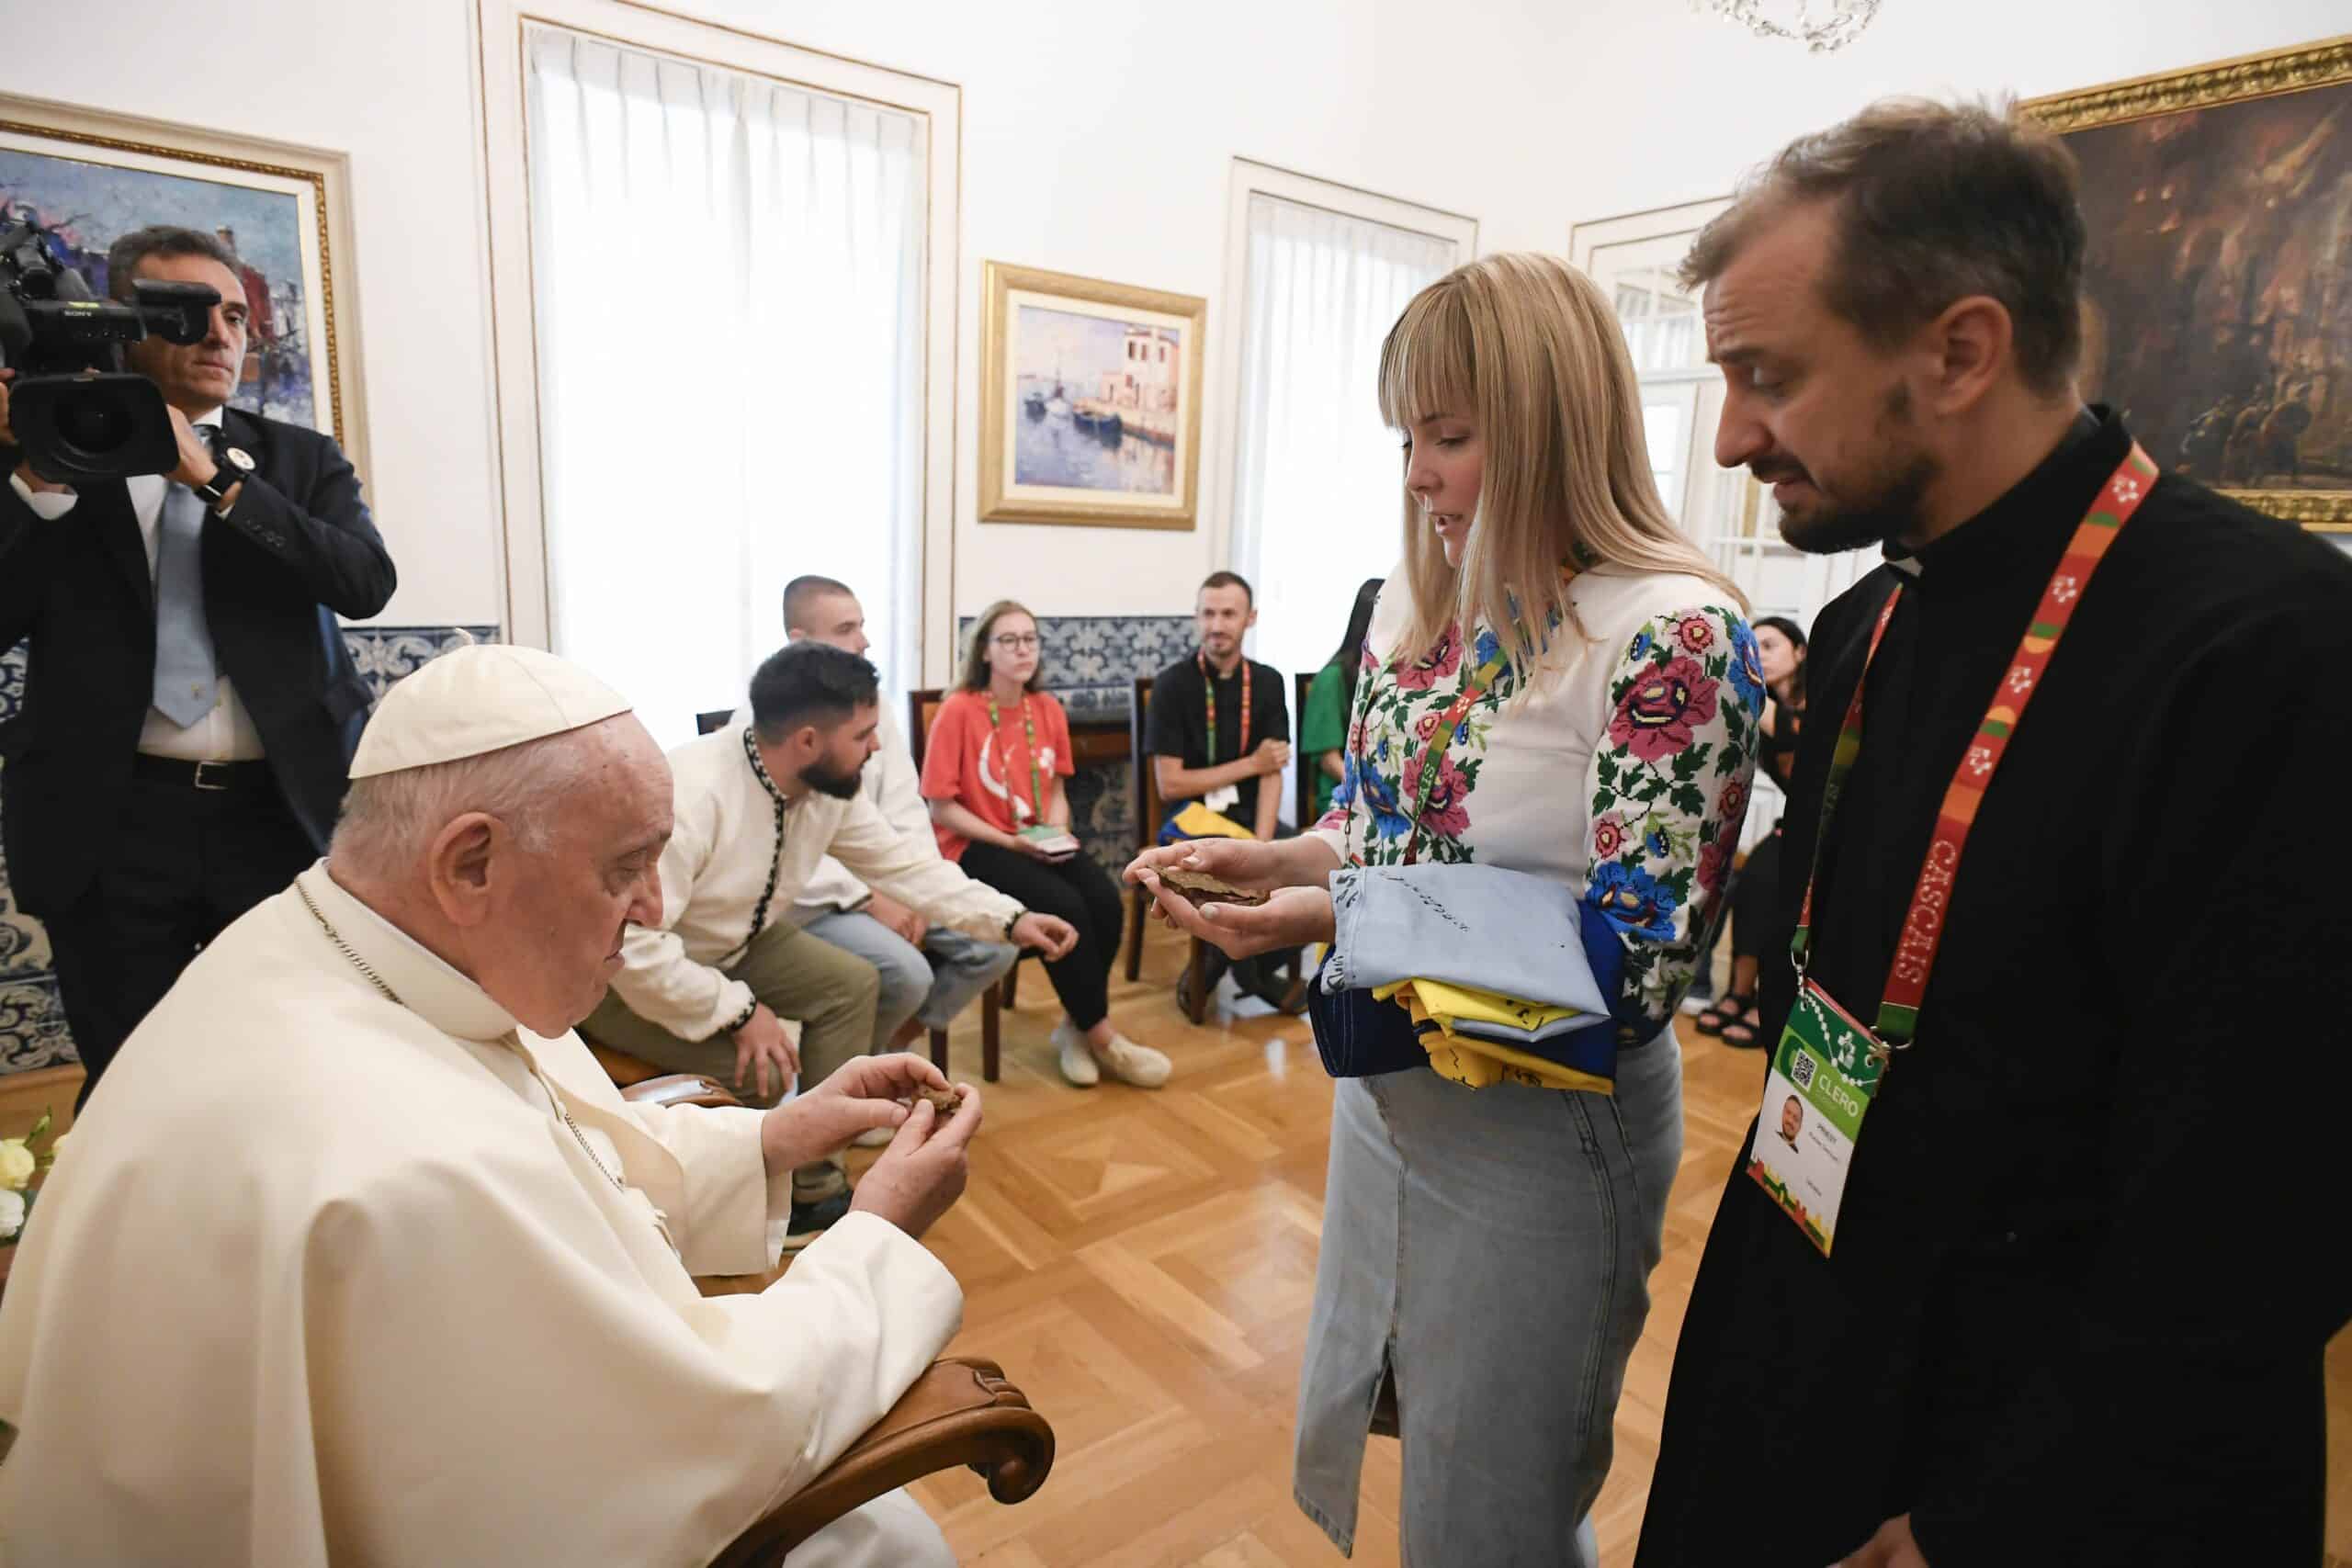 A young woman and a priest from Ukraine give Pope Francis shards from their war-torn country during a private meeting Aug. 3, 2023, at the Vatican nunciature in Lisbon, Portugal. The Vatican said the pope spent half an hour with a group of Ukrainian pilgrims attending World Youth Day, listening to their stories and praying for peace. (CNS photo/Vatican Media)